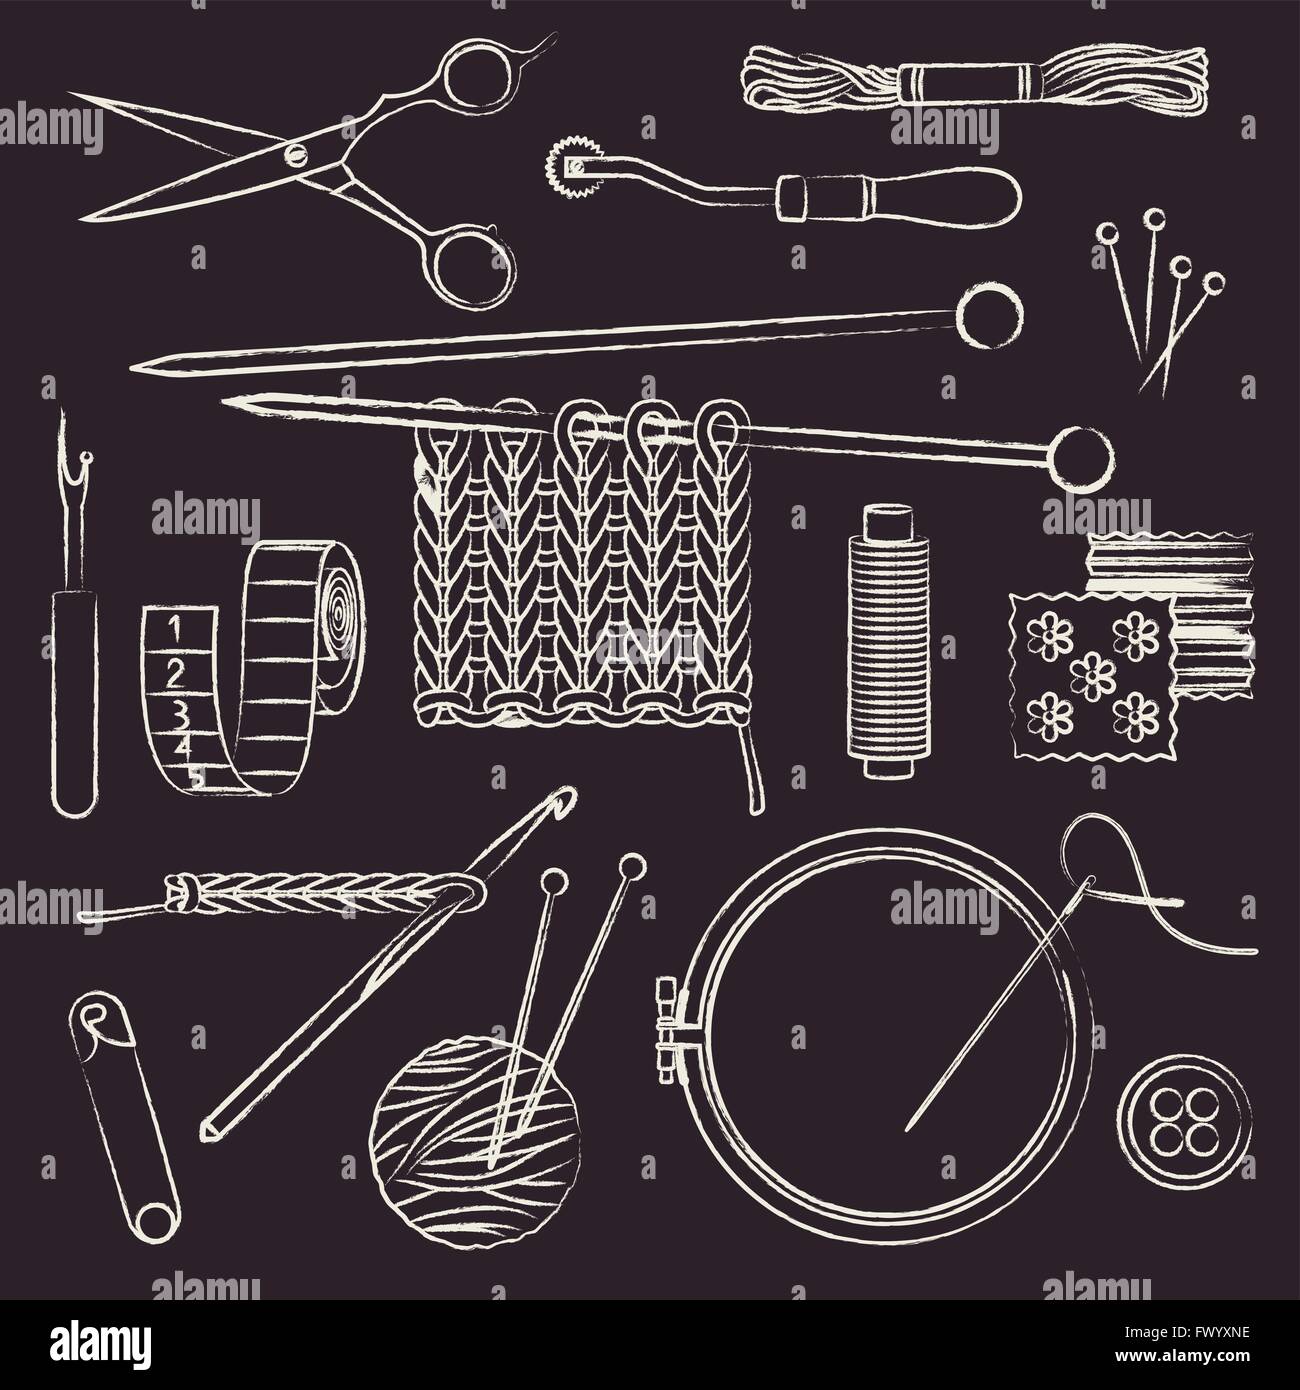 Sewing and sewing needlework chalk stroked symbols on blackboard Stock Vector